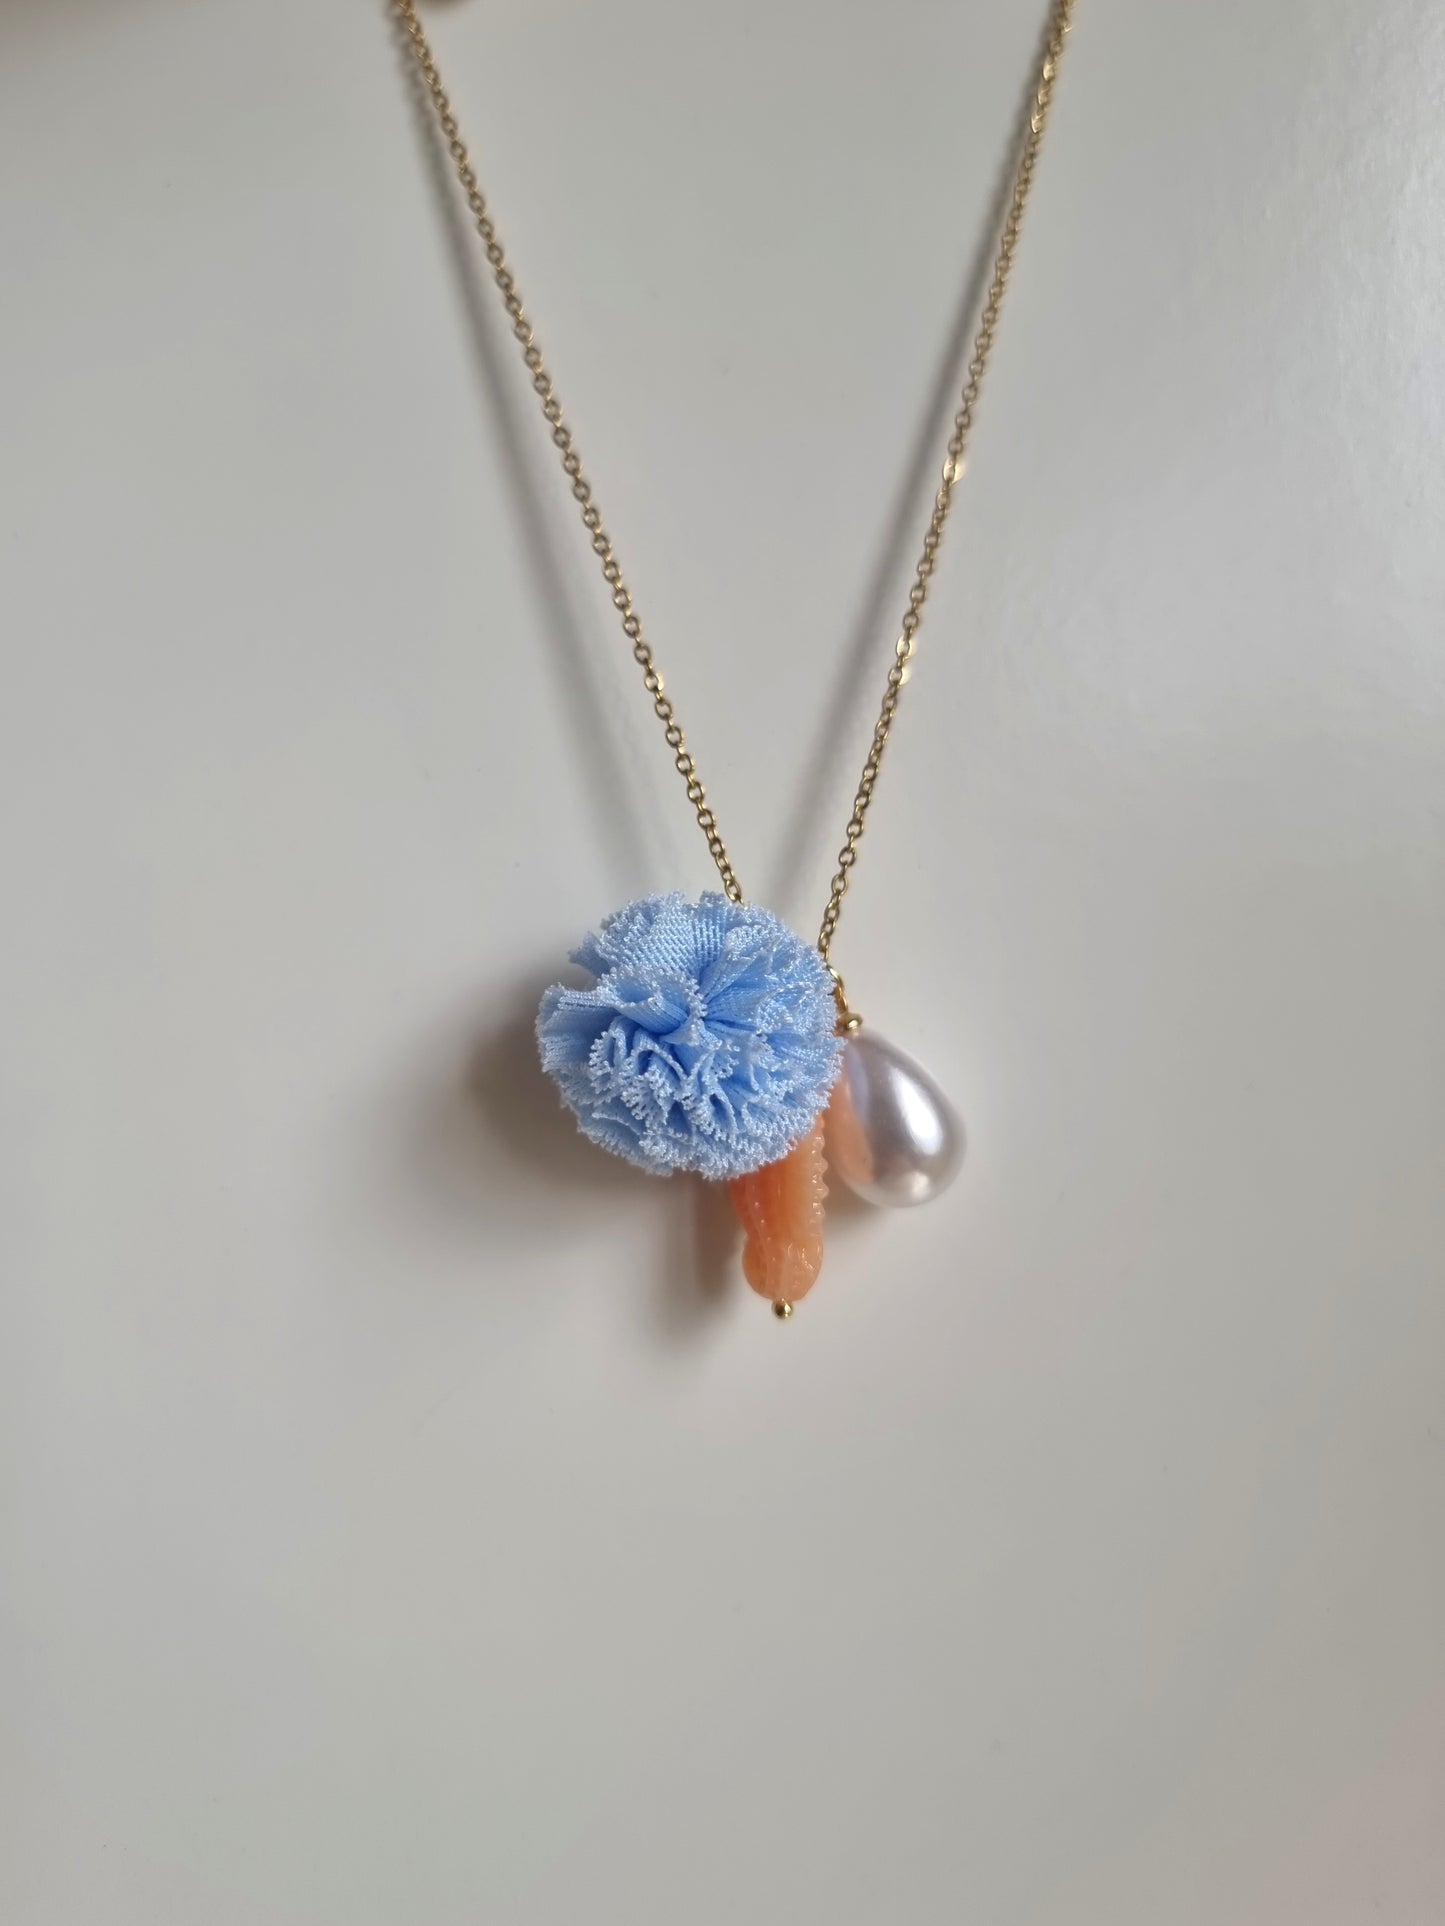 Meri! Seahorse charm necklace in peach with blue pompom